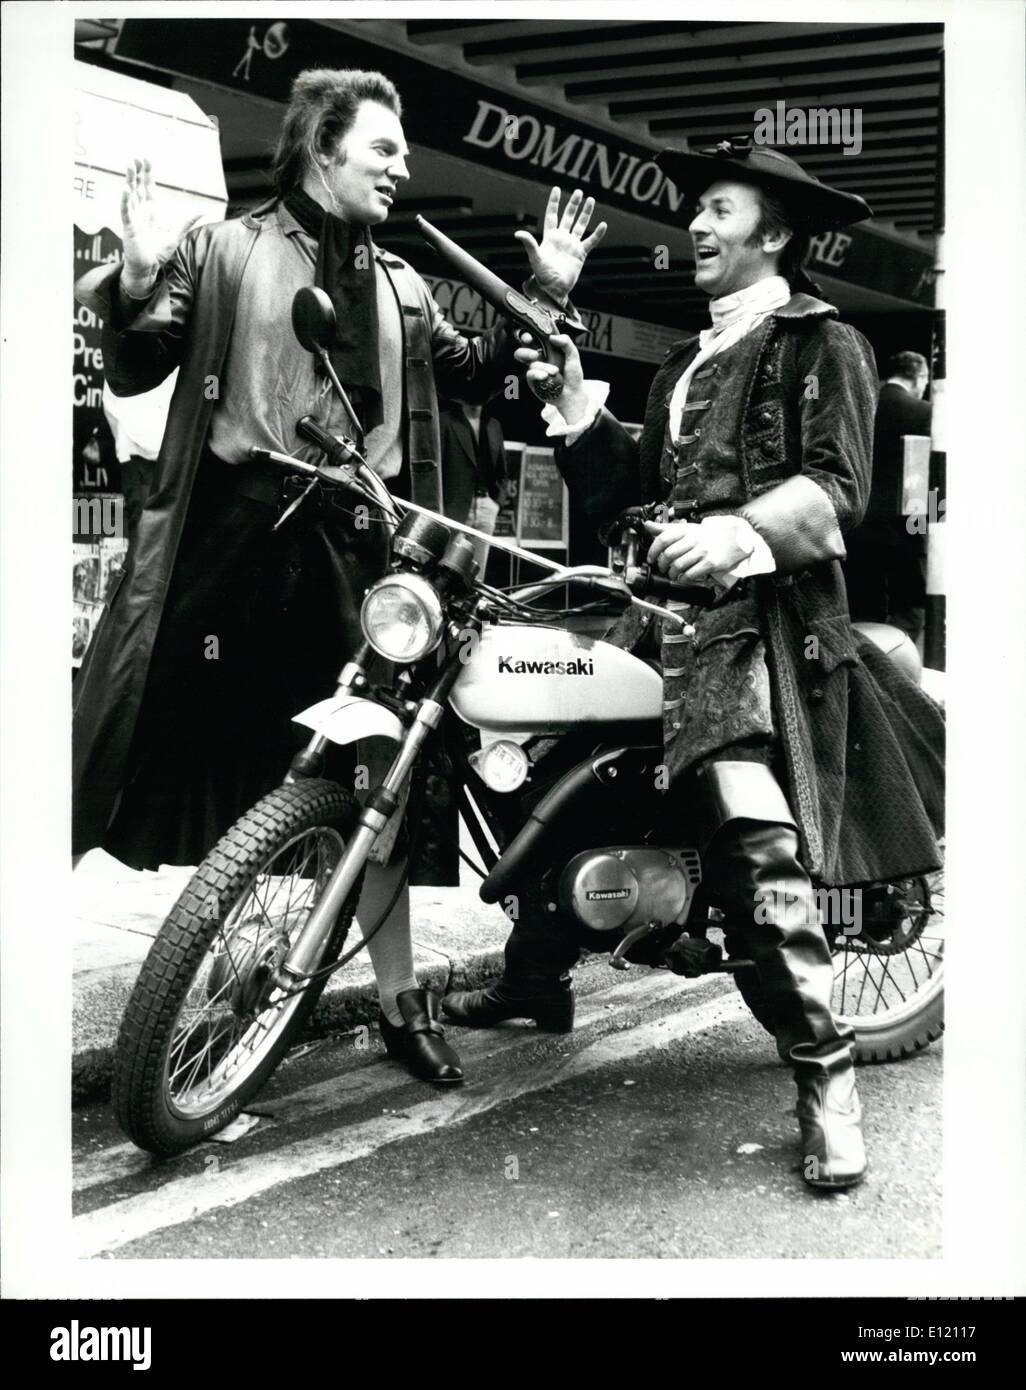 Sep. 09, 1981 - ''Modern Highwayman'': Scottish Open has brought its highly acclaimed Edinburgh Festival Production Begger's Opera to the Dominion Theatre, London, The opera opened last night for a limited run of only ten days. The Beggars Opera which is based on the low life of London in the eighteenth century was first performed at the Lincolns Inn Theatre in 1728 and is often Considered the ancestor of the American musical Stock Photo